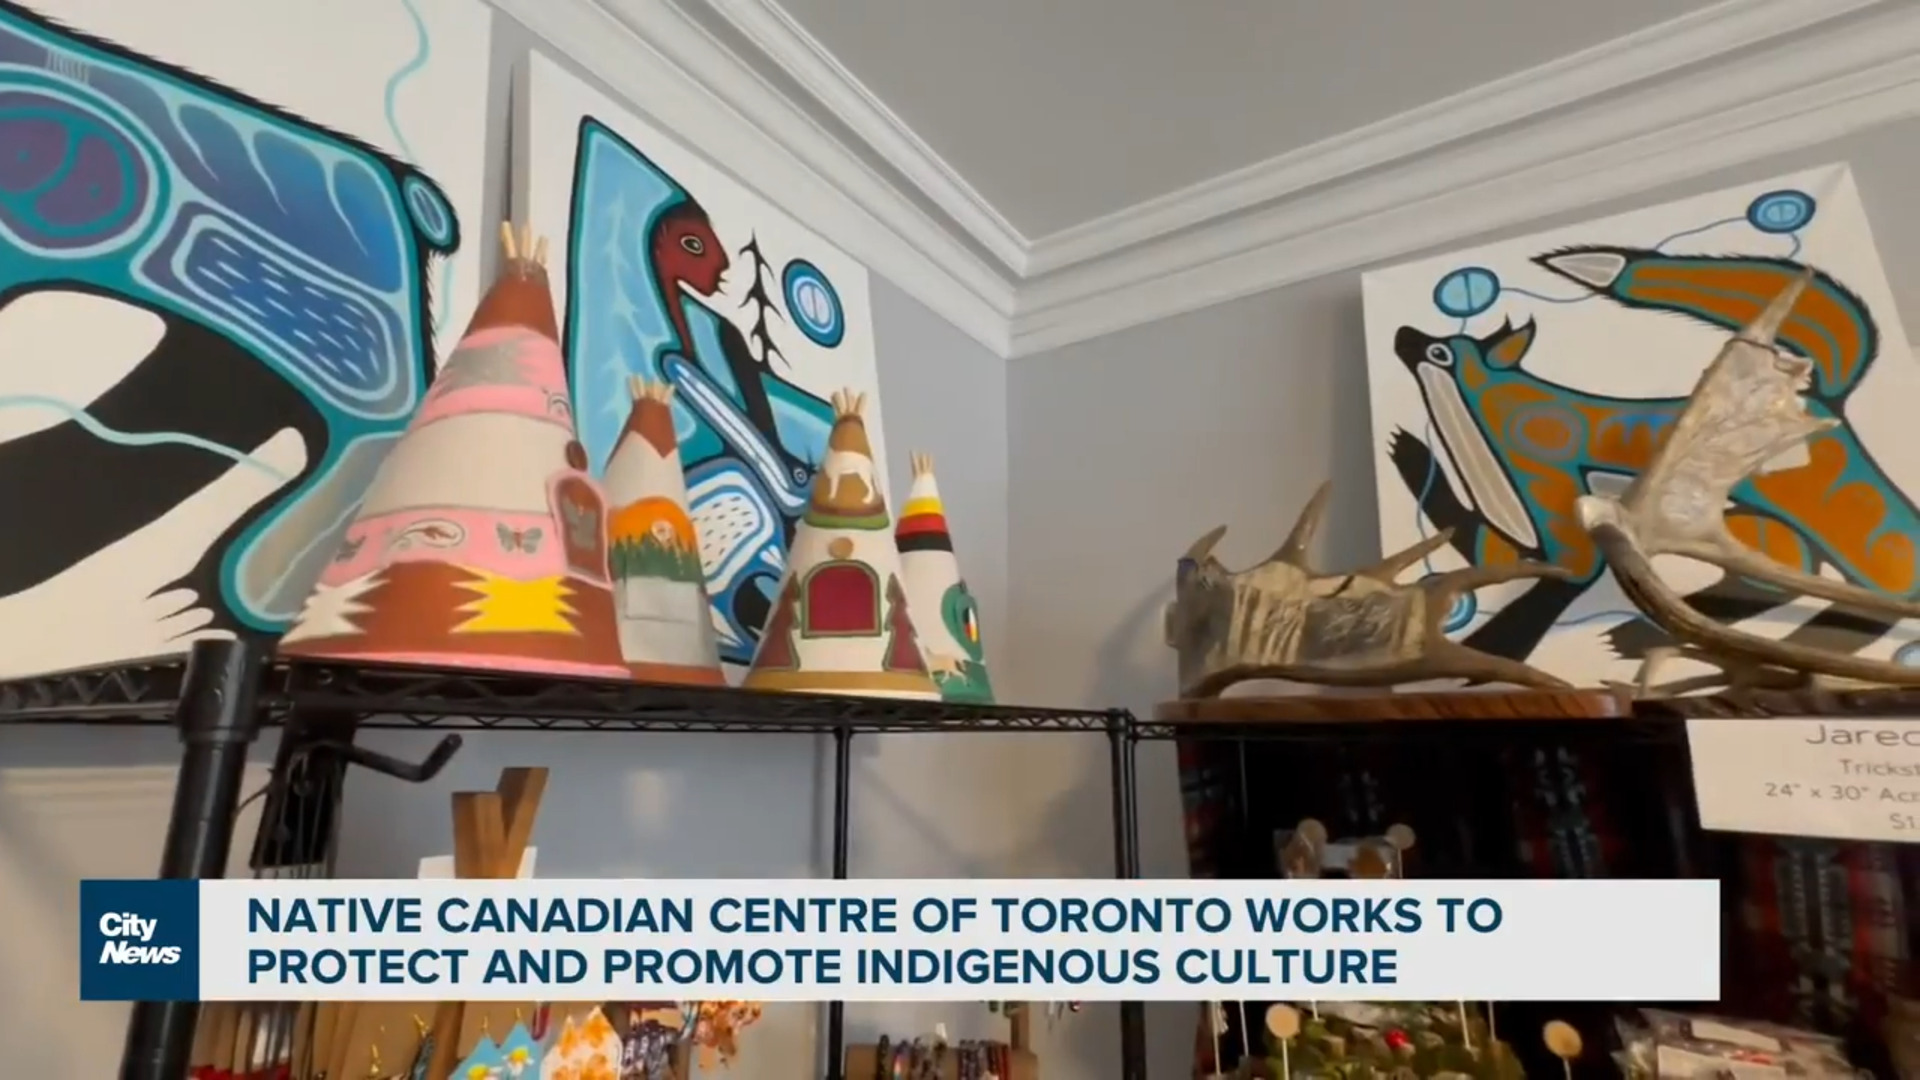 Native Canadian Centre of Toronto promotes, protects Indigenous culture